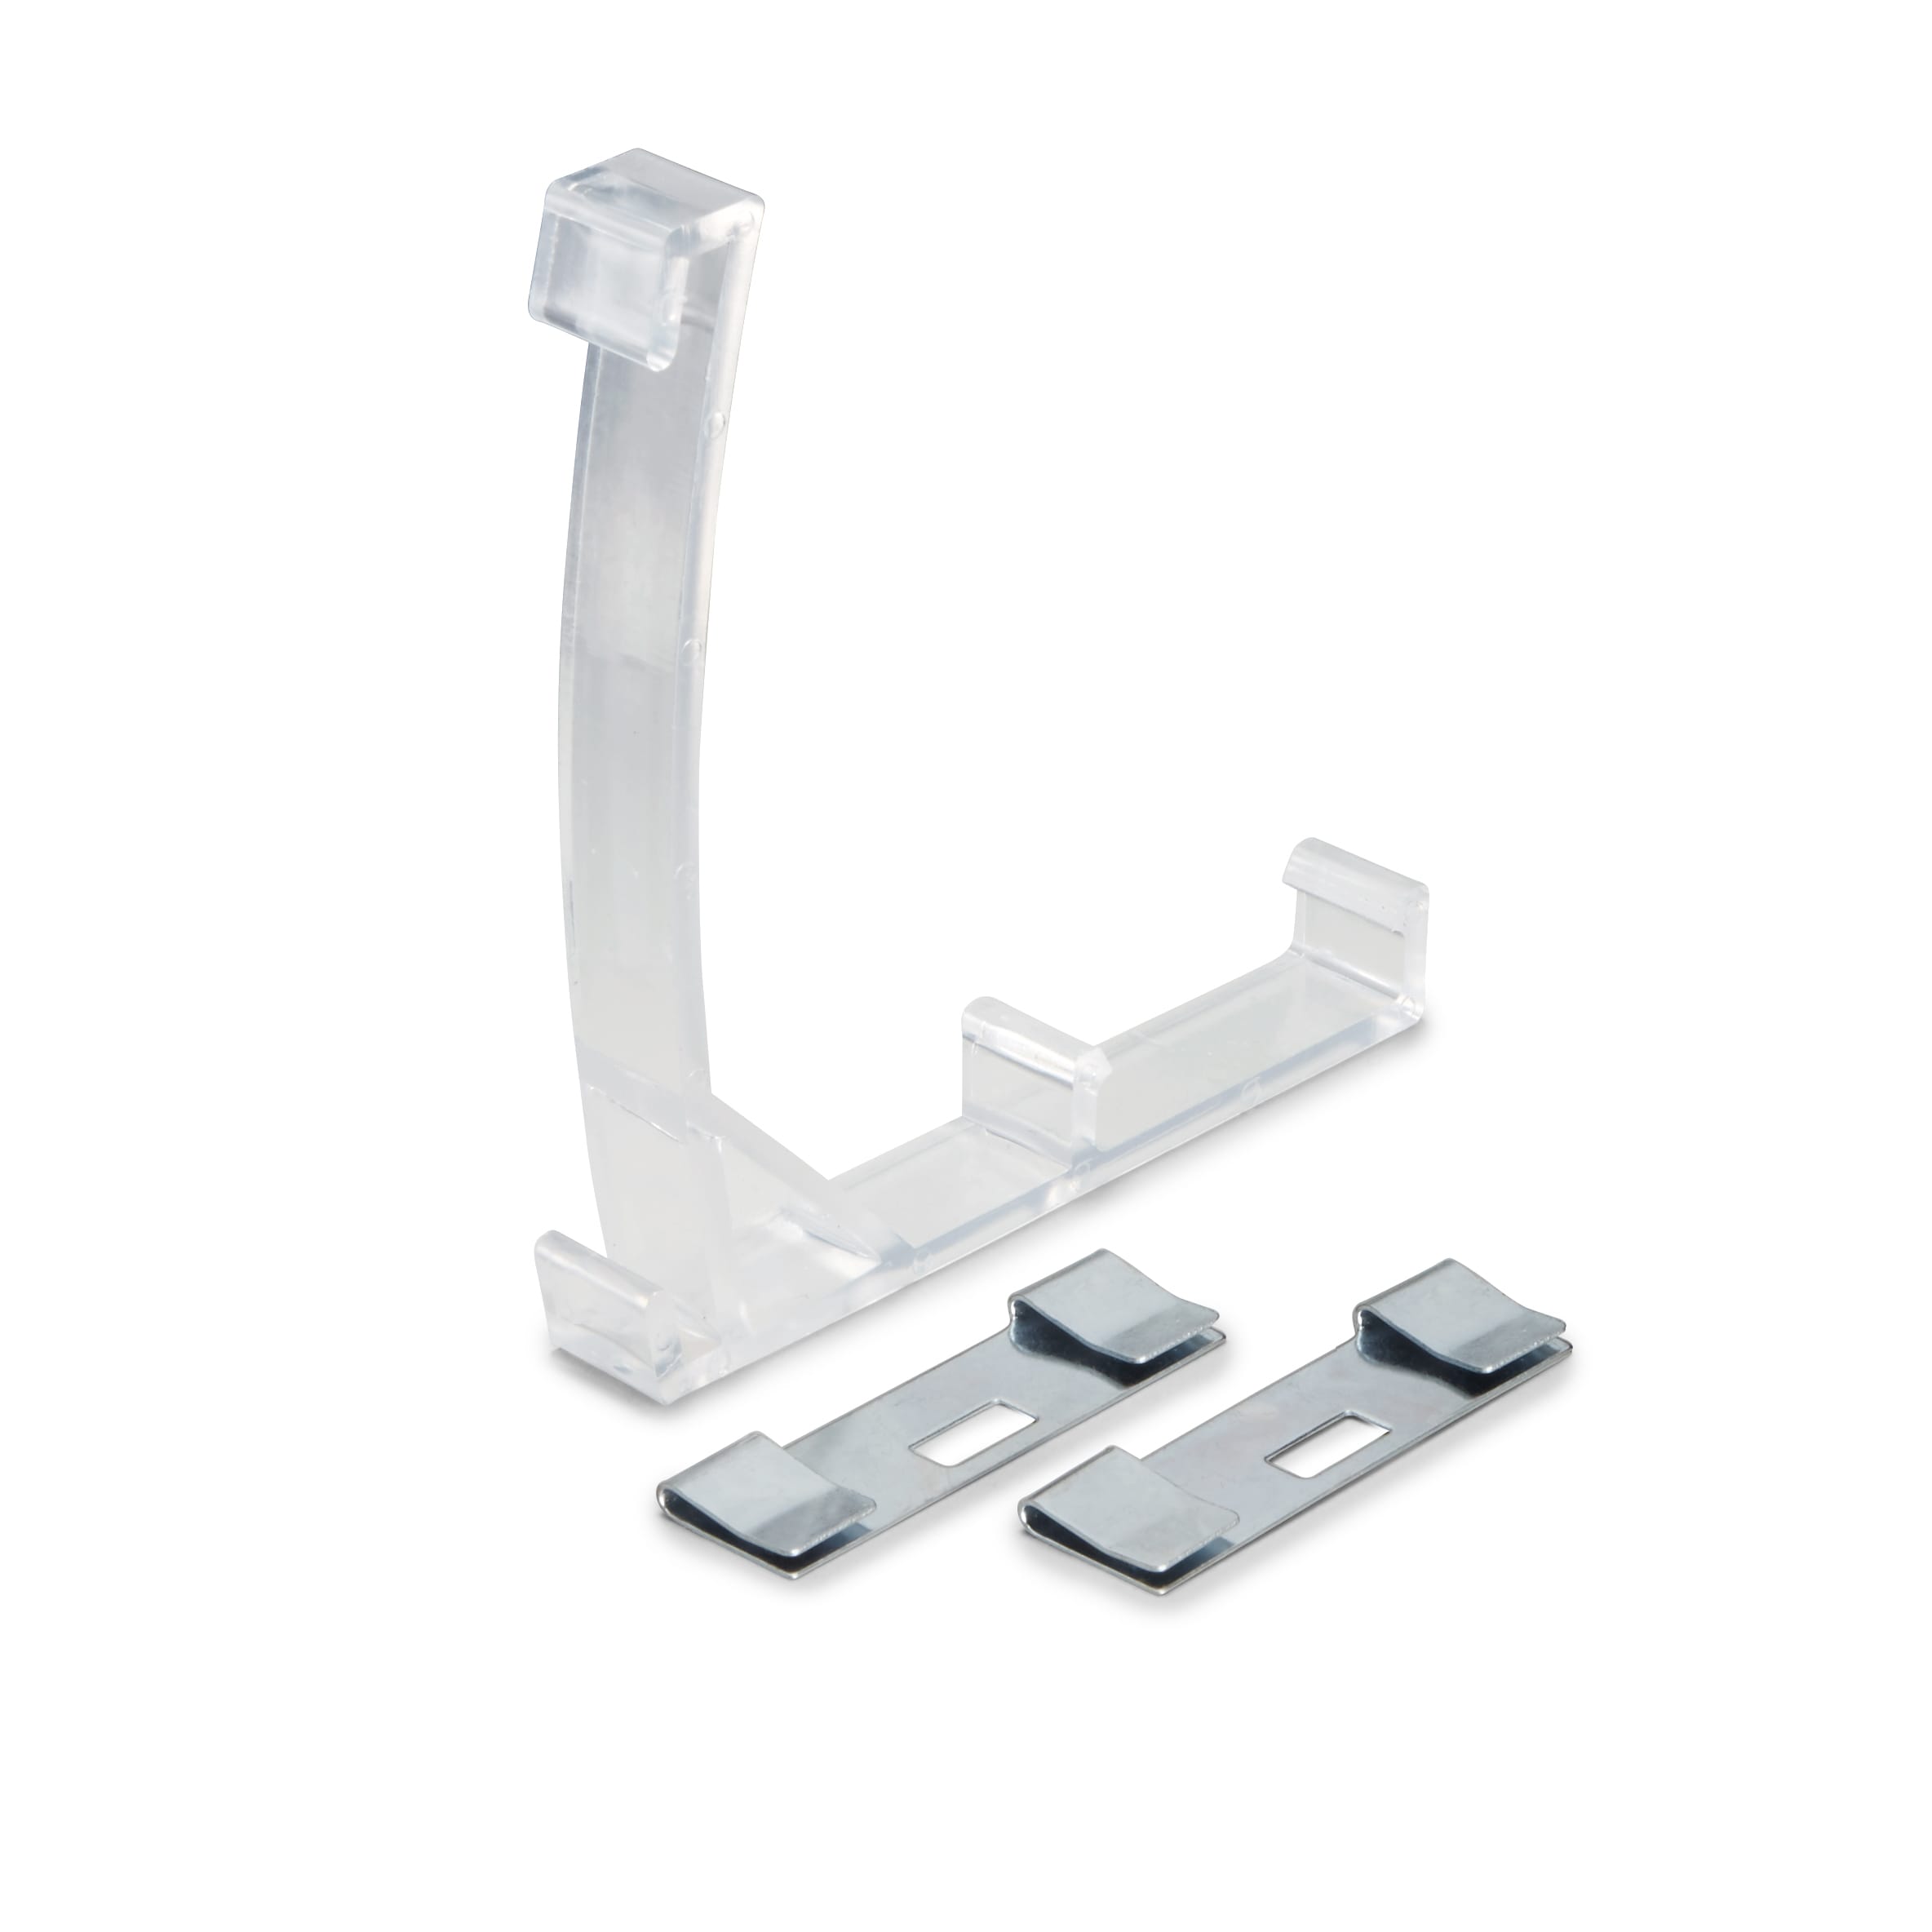 CARRIERS LEVOLOR REPLACEMENT HOOKS PLASTIC VANES HOLDERS FOR VERTICAL BLINDS 